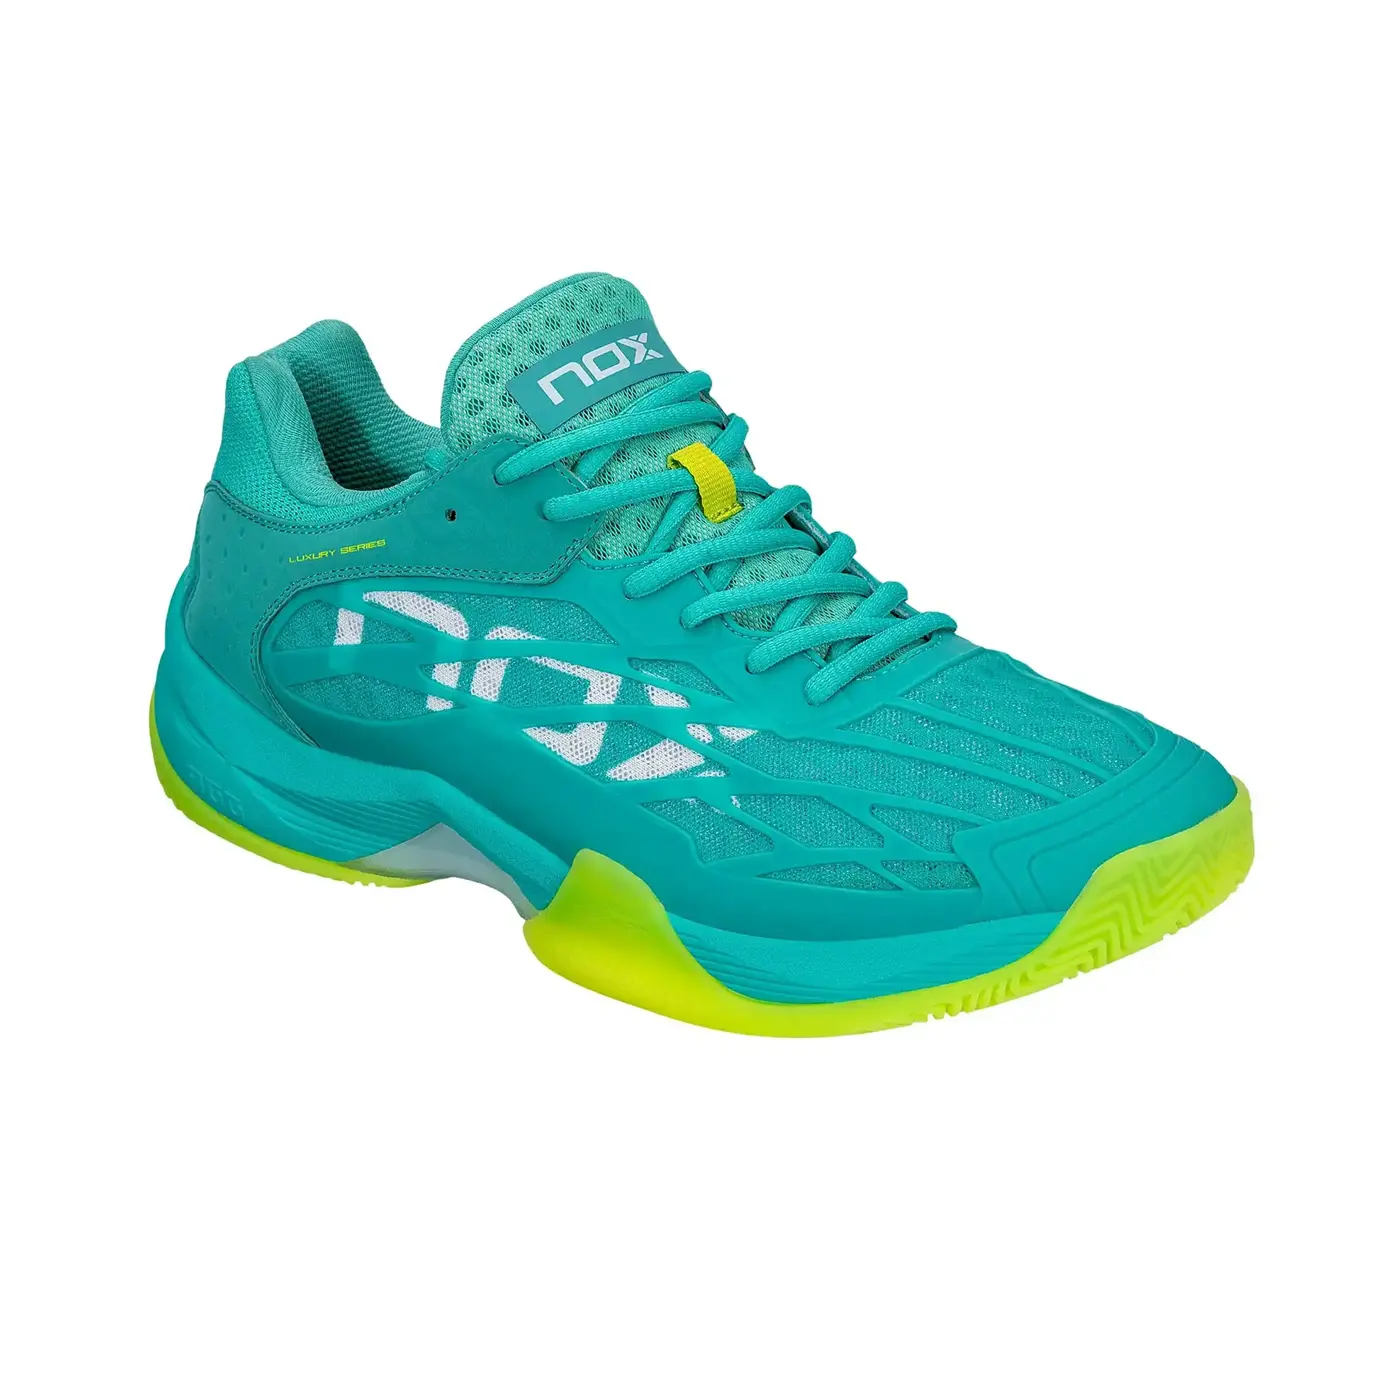 NOX AT10 LUX TurquoiseLime Padel Shoes Image 3